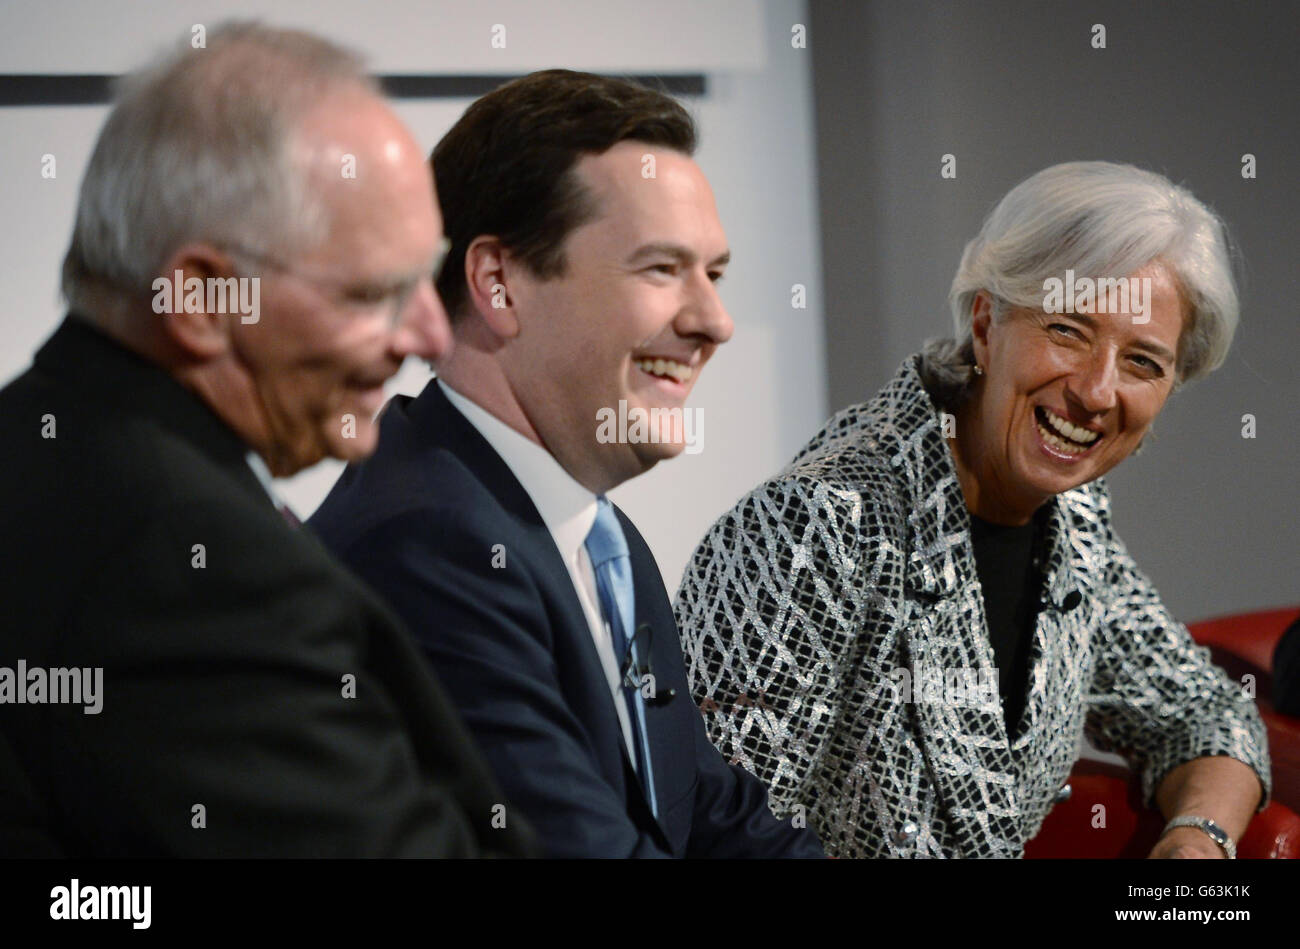 (Left - right) Dr Wolfgang Schauble, German Federal Minister of Finance, Chancellor of the Exchequer George Osborne, Christine Lagarde, Managing Director of the International Monetary Fund and Jim Flaherty, Minister of Finance, Canada hold a Q&amp;A on the challenges facing the global economy at the the Global Investment Conference, London. Stock Photo